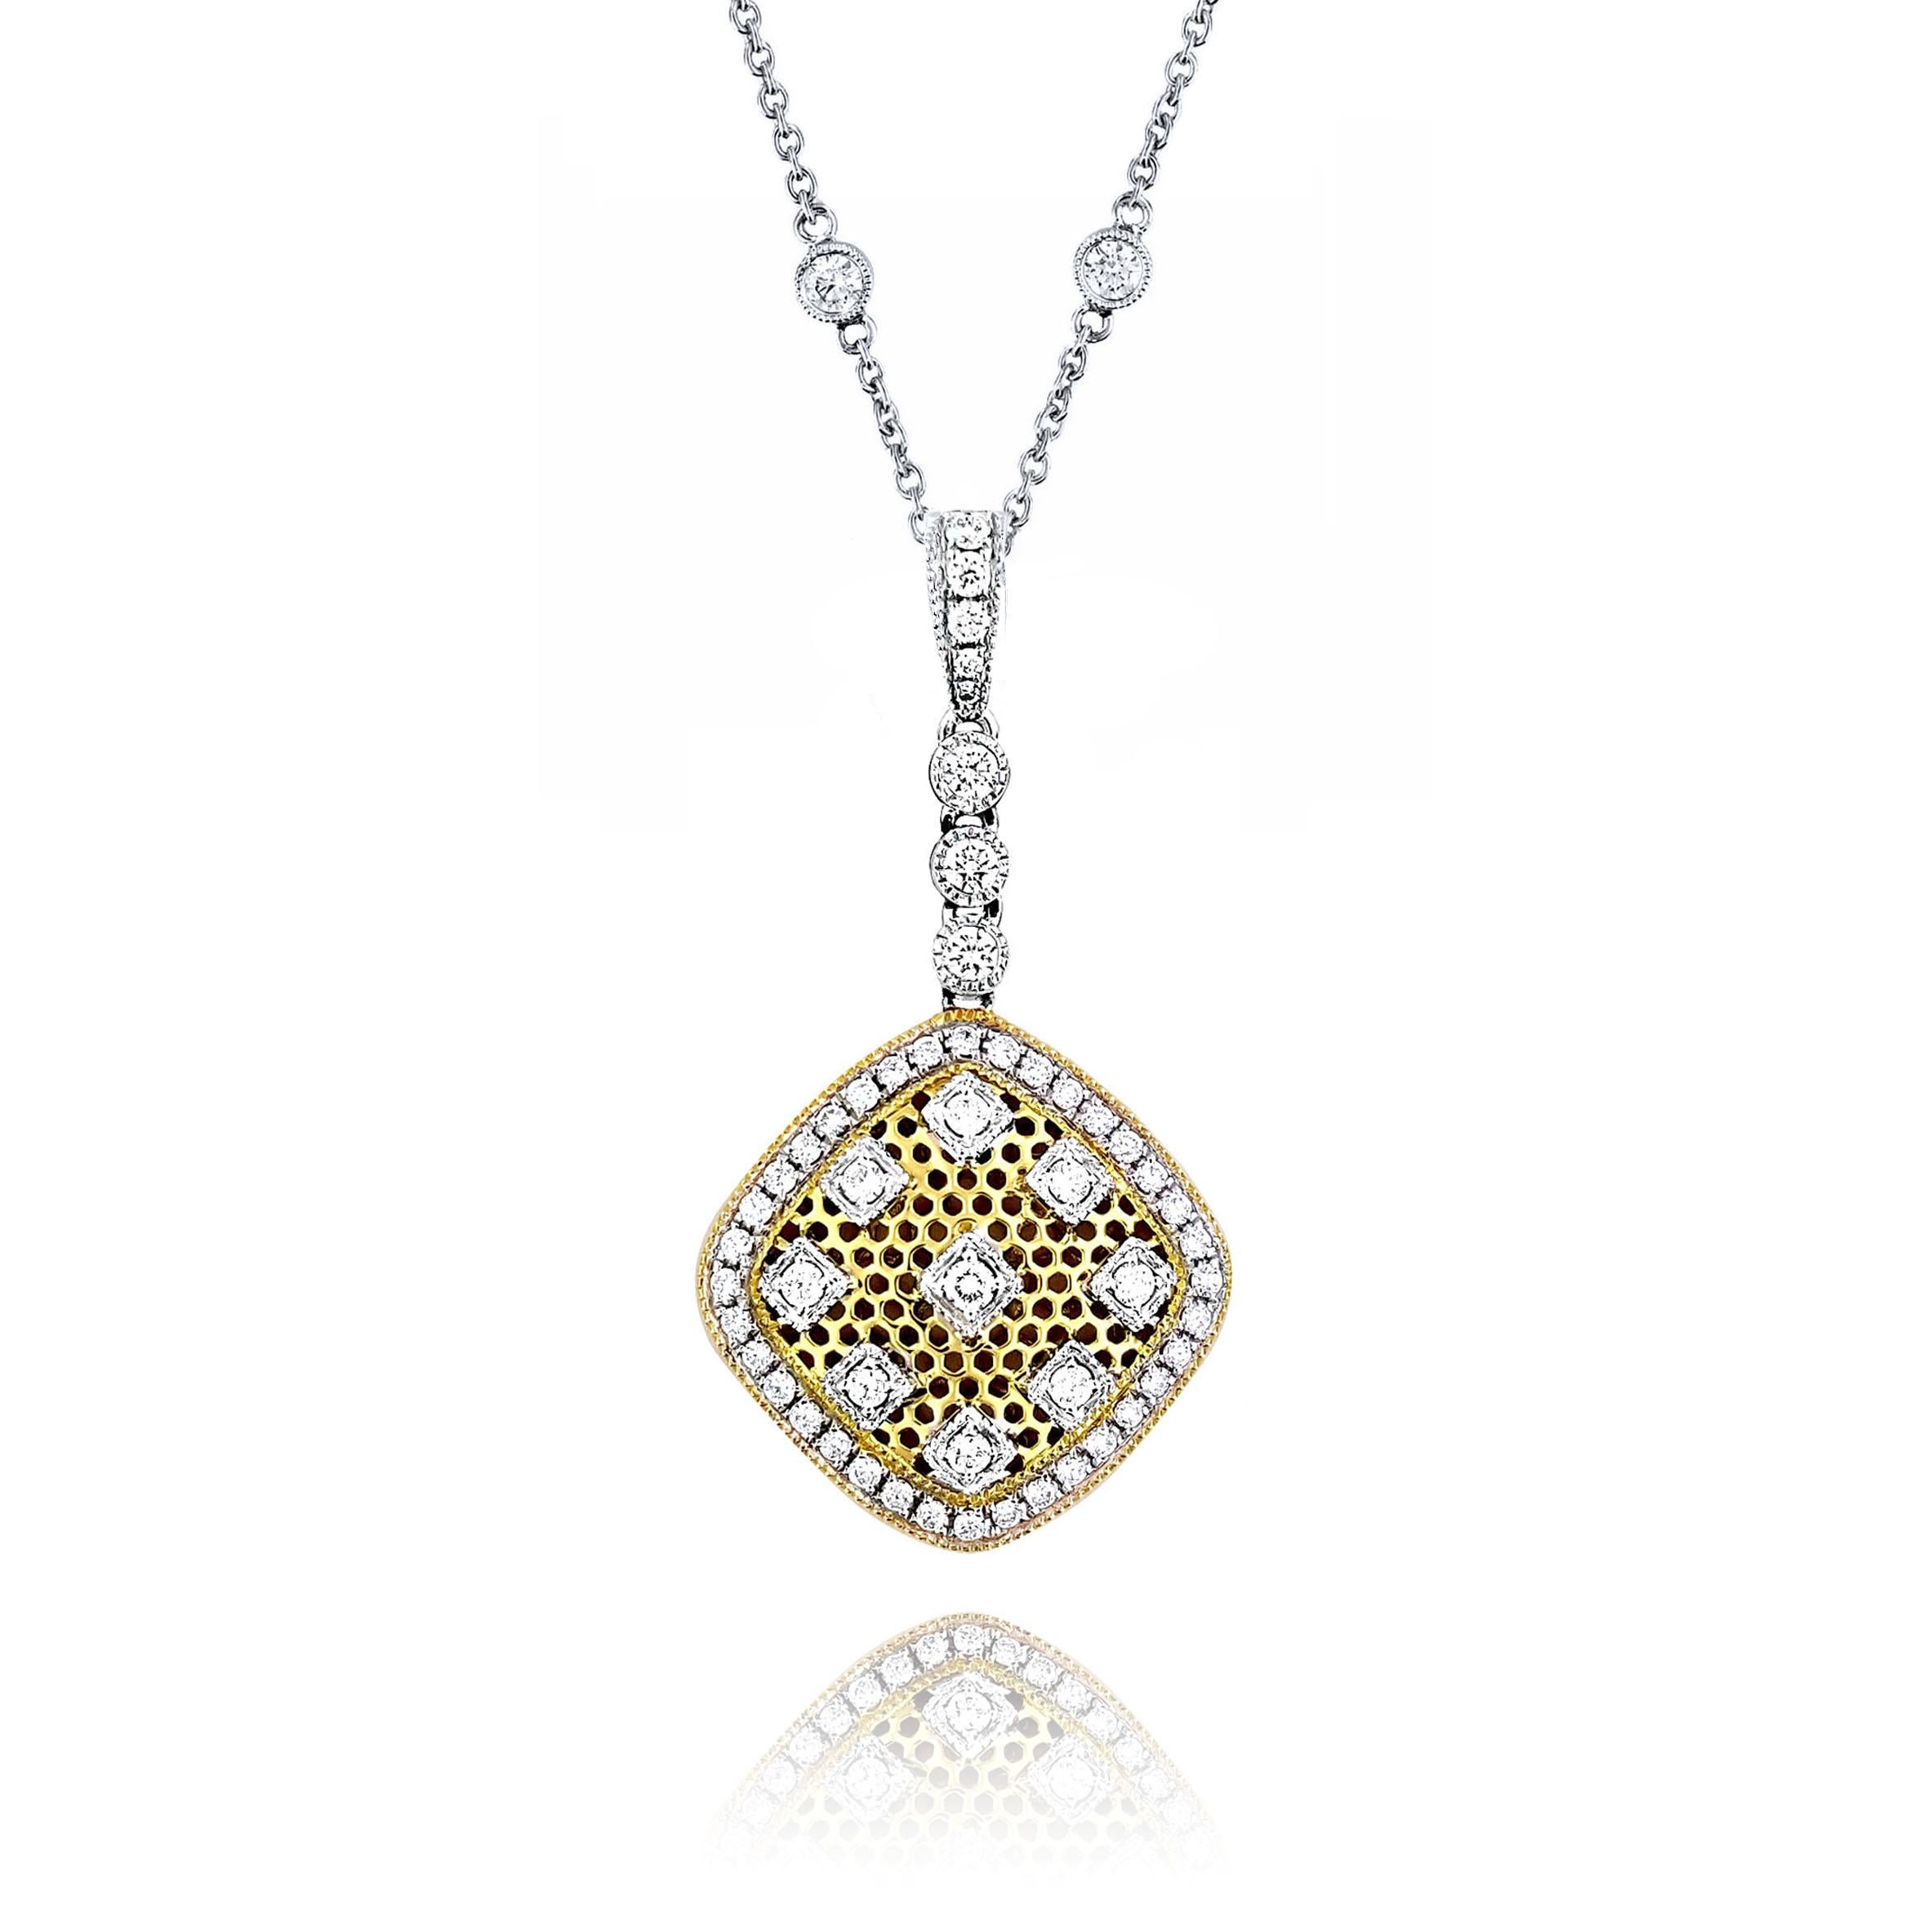 Produced by award winning Italian designer Stefano Vitolo. Stefano creates custom artisanal one of a kind jewelry with excellent gemstones in a truly old world Italian craftmanship.

This diamond pendant has 0.44 total carat weight of F/G color and